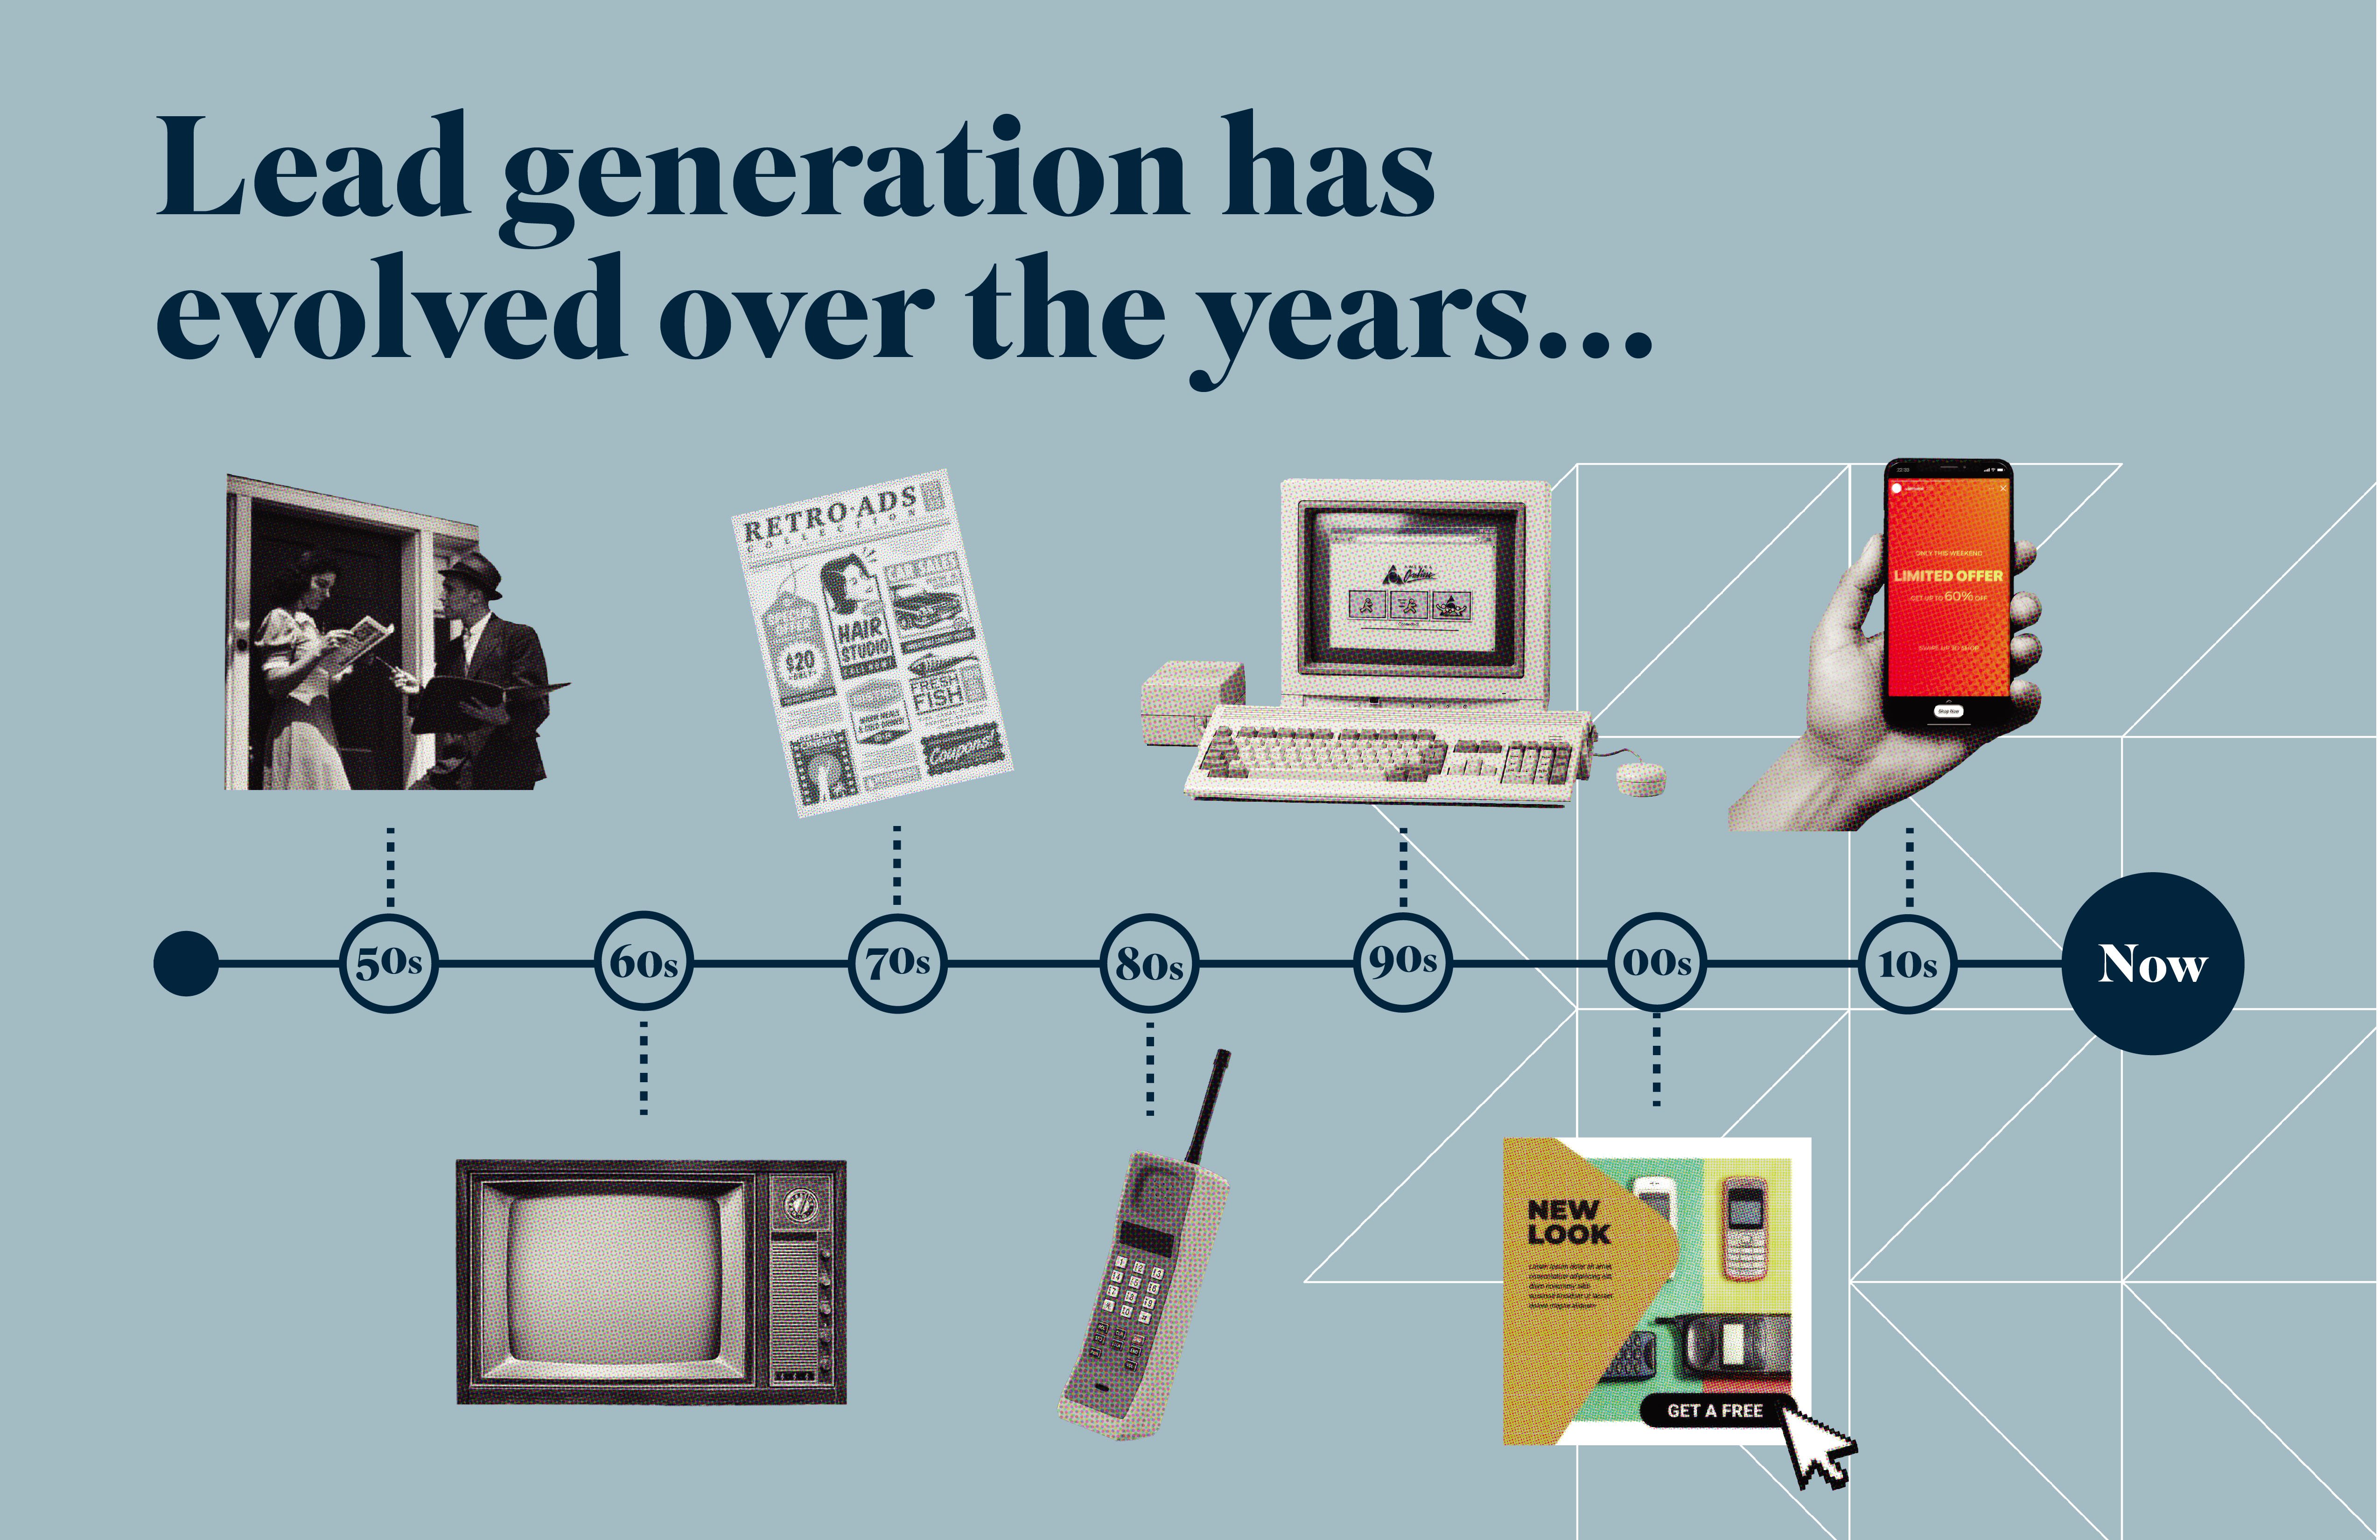 Lead generation has evolved over the years. And you must adapt or be left behind.